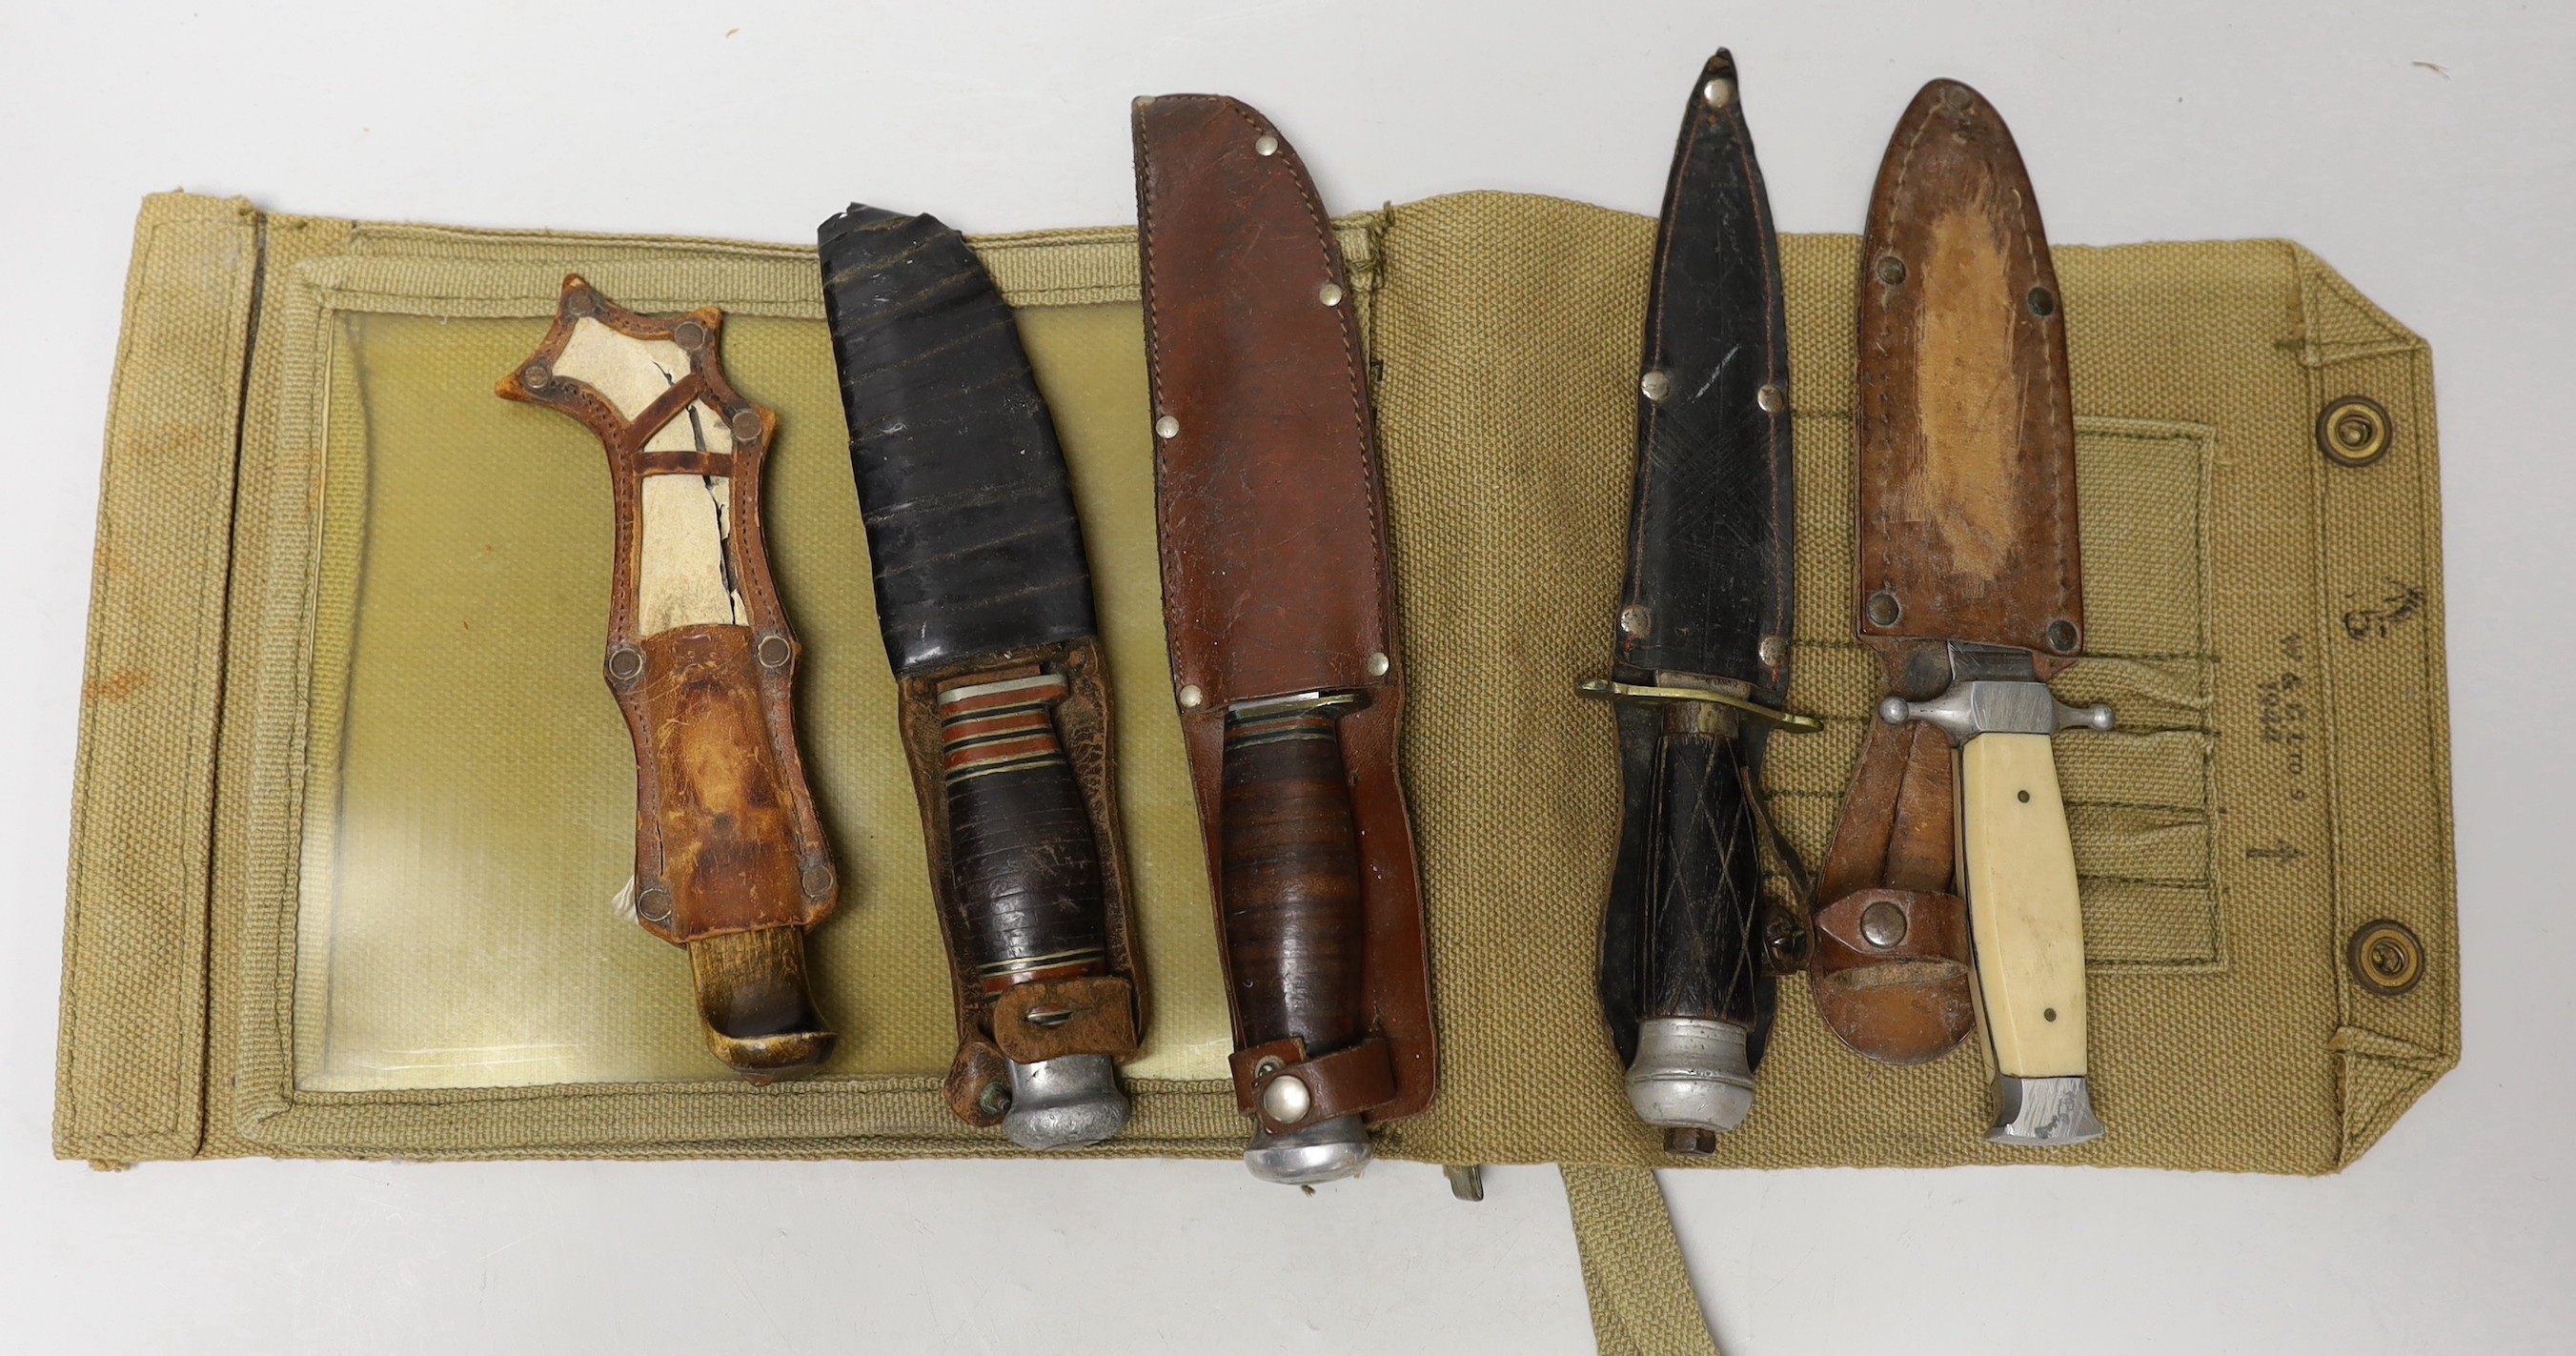 A group of five various knives                                                                                                                                                                                              